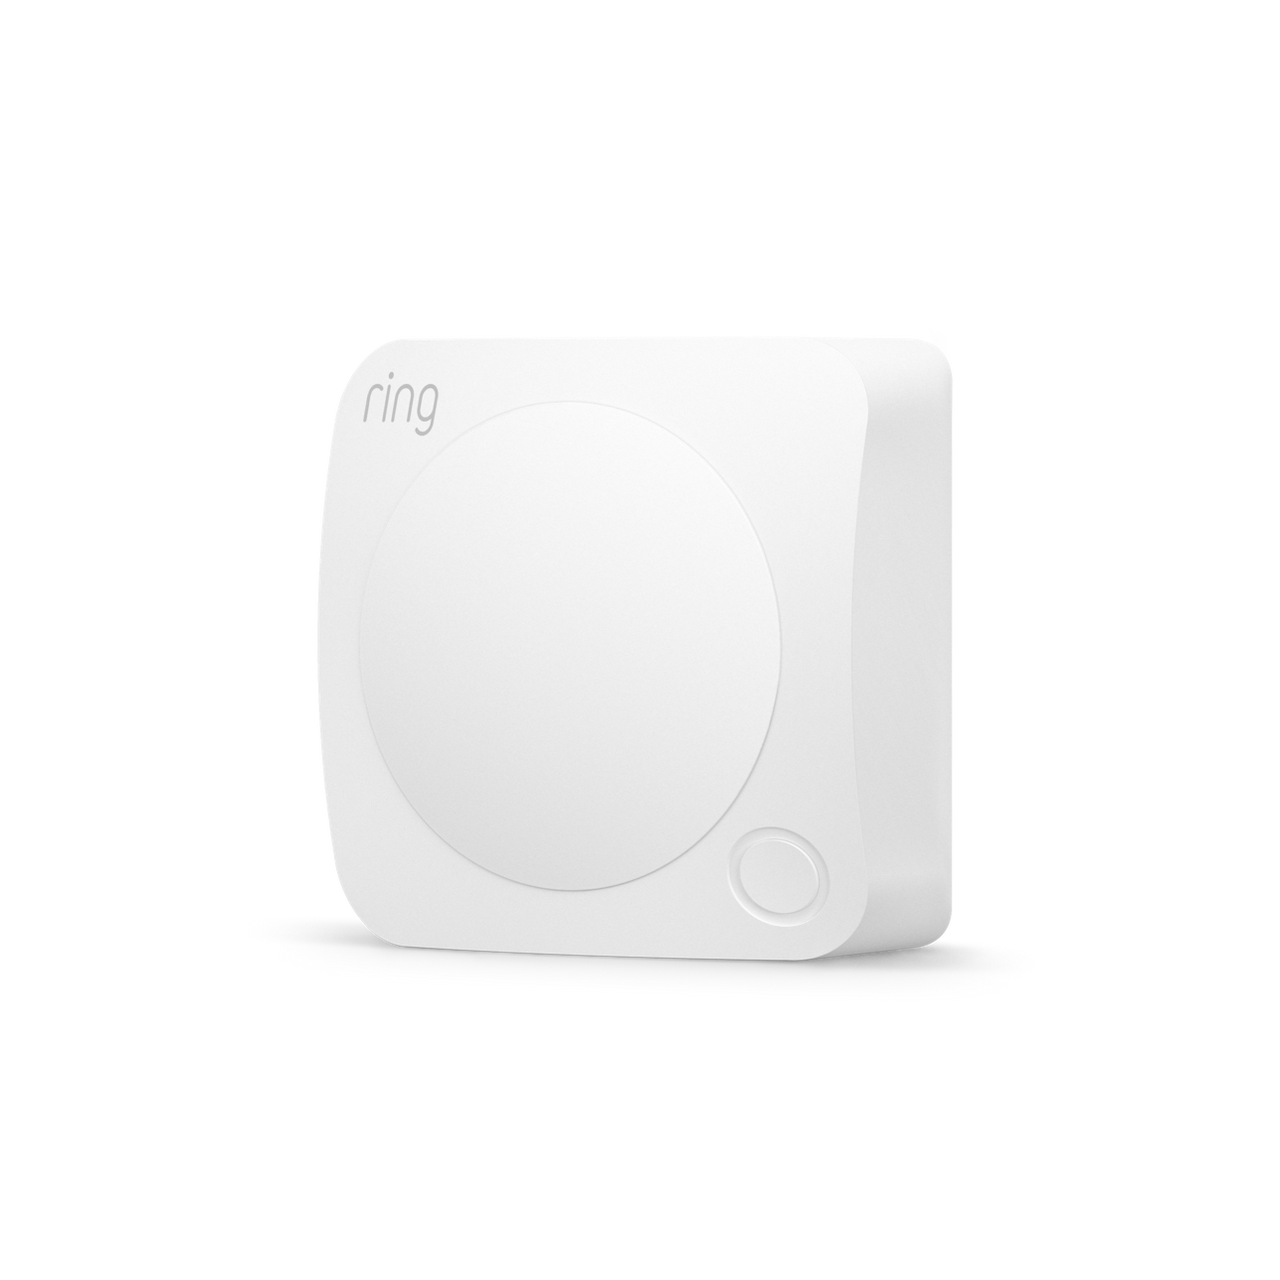 products/Alarm2.0-MotionDetector_angled_1290x1290_0c7878bf-3b63-4096-973c-f61a28ab0f60.png